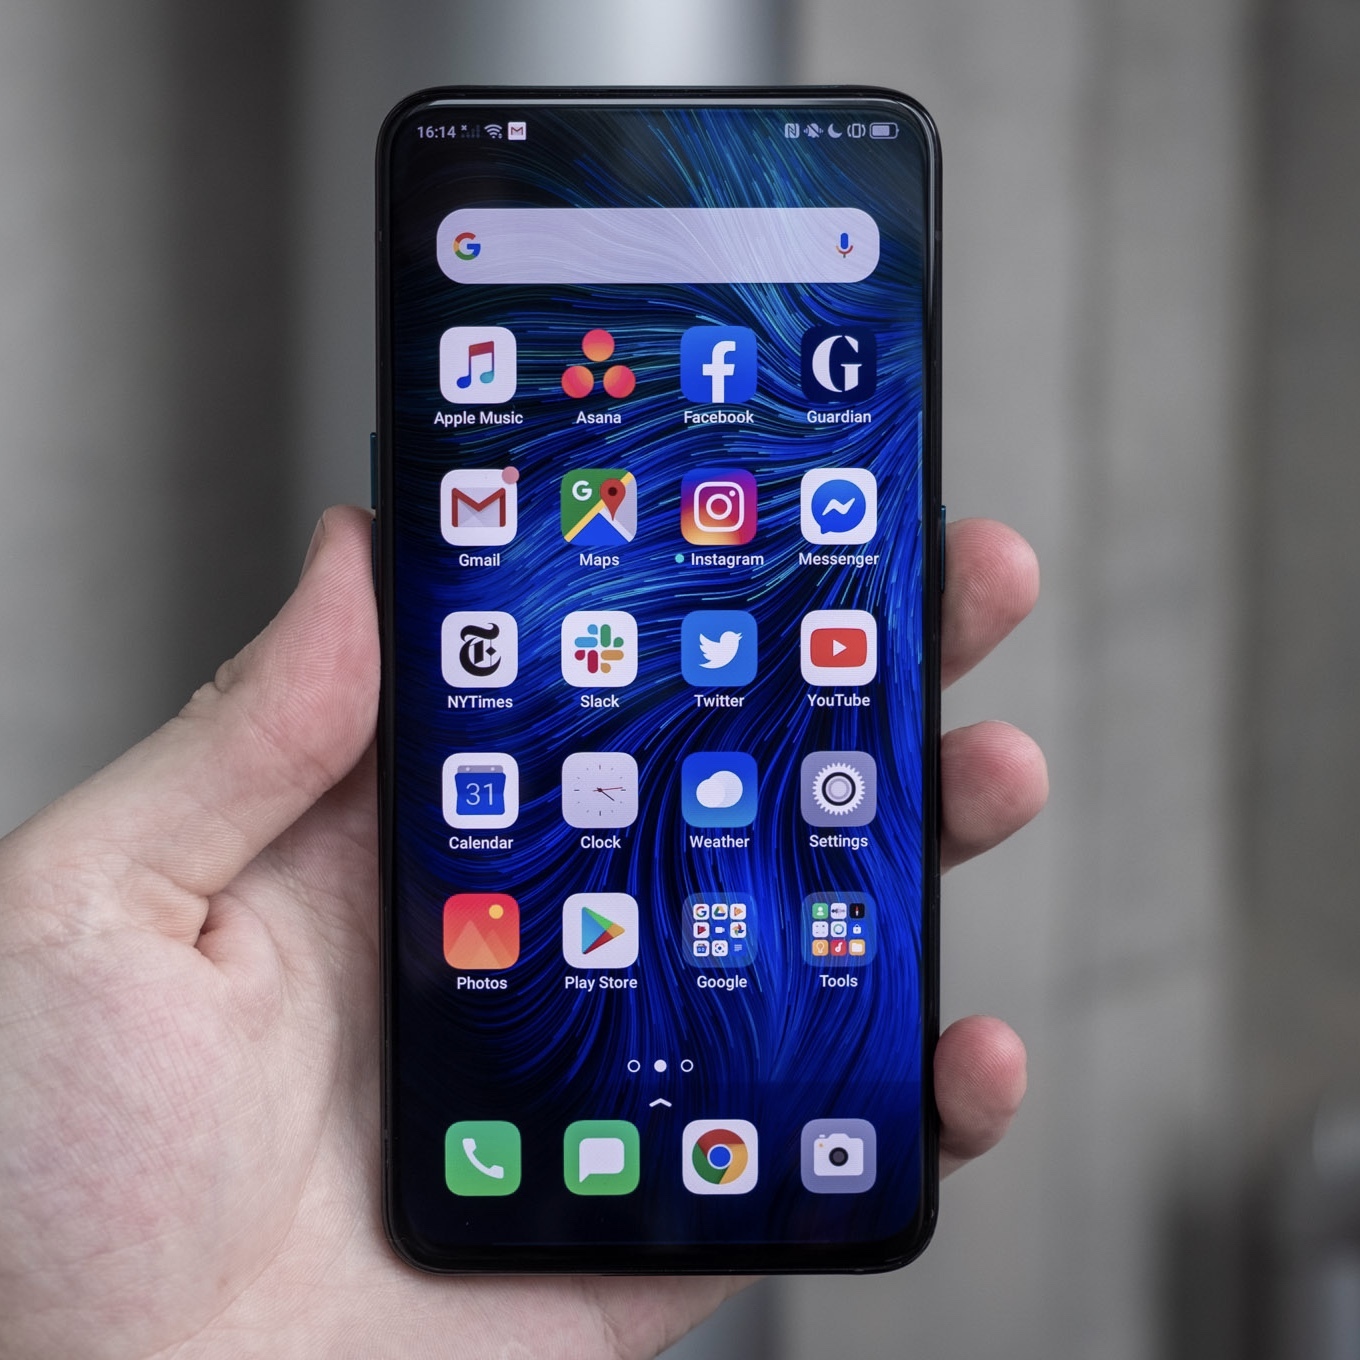 Oppo Reno 10x Zoom review: a OnePlus 7 Pro with a better camera 1